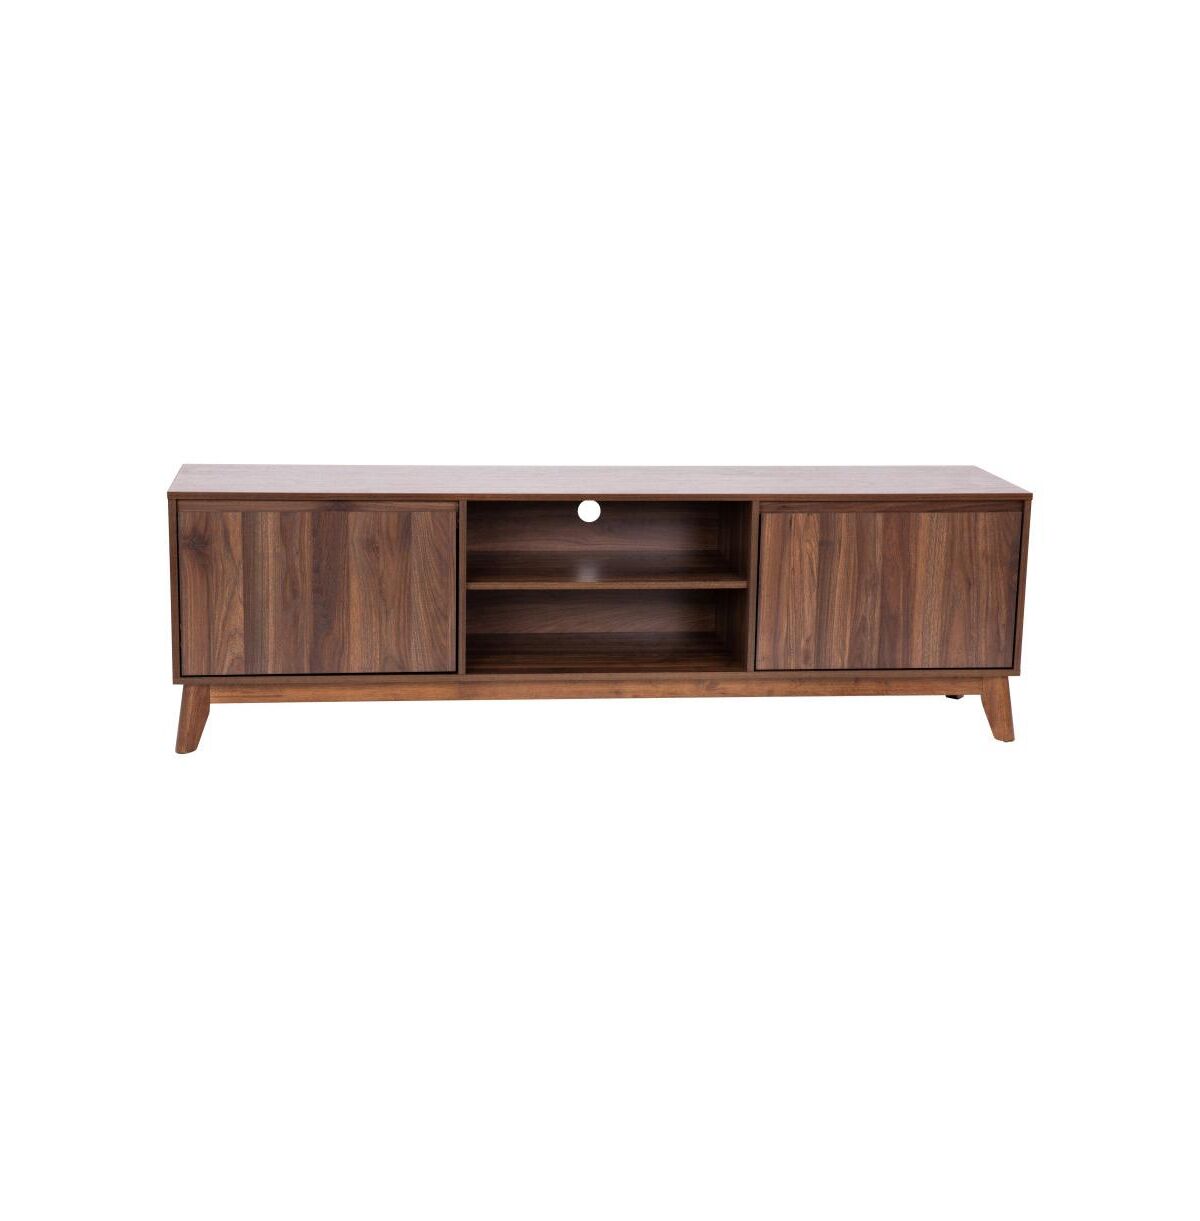 Emma+oliver Beverly Mid-Century Modern Wooden Tv Stand With Soft Close Doors, Shelf, Cord Management Hole And Tapered Legs - Dark walnut